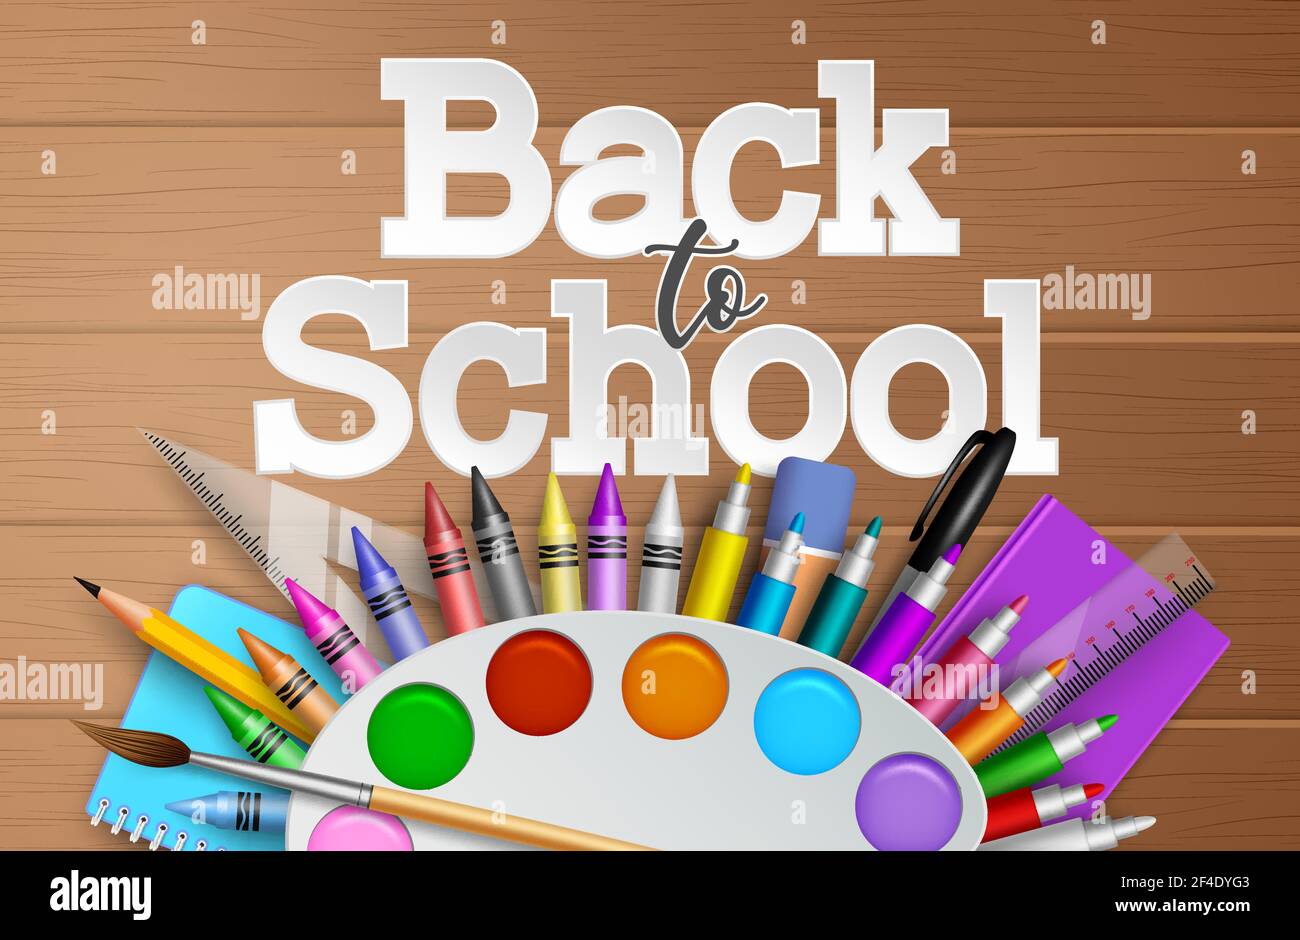 Back to school vector banner background. Back to school text with coloring and painting education elements like paint, crayons and color pen for art. Stock Vector